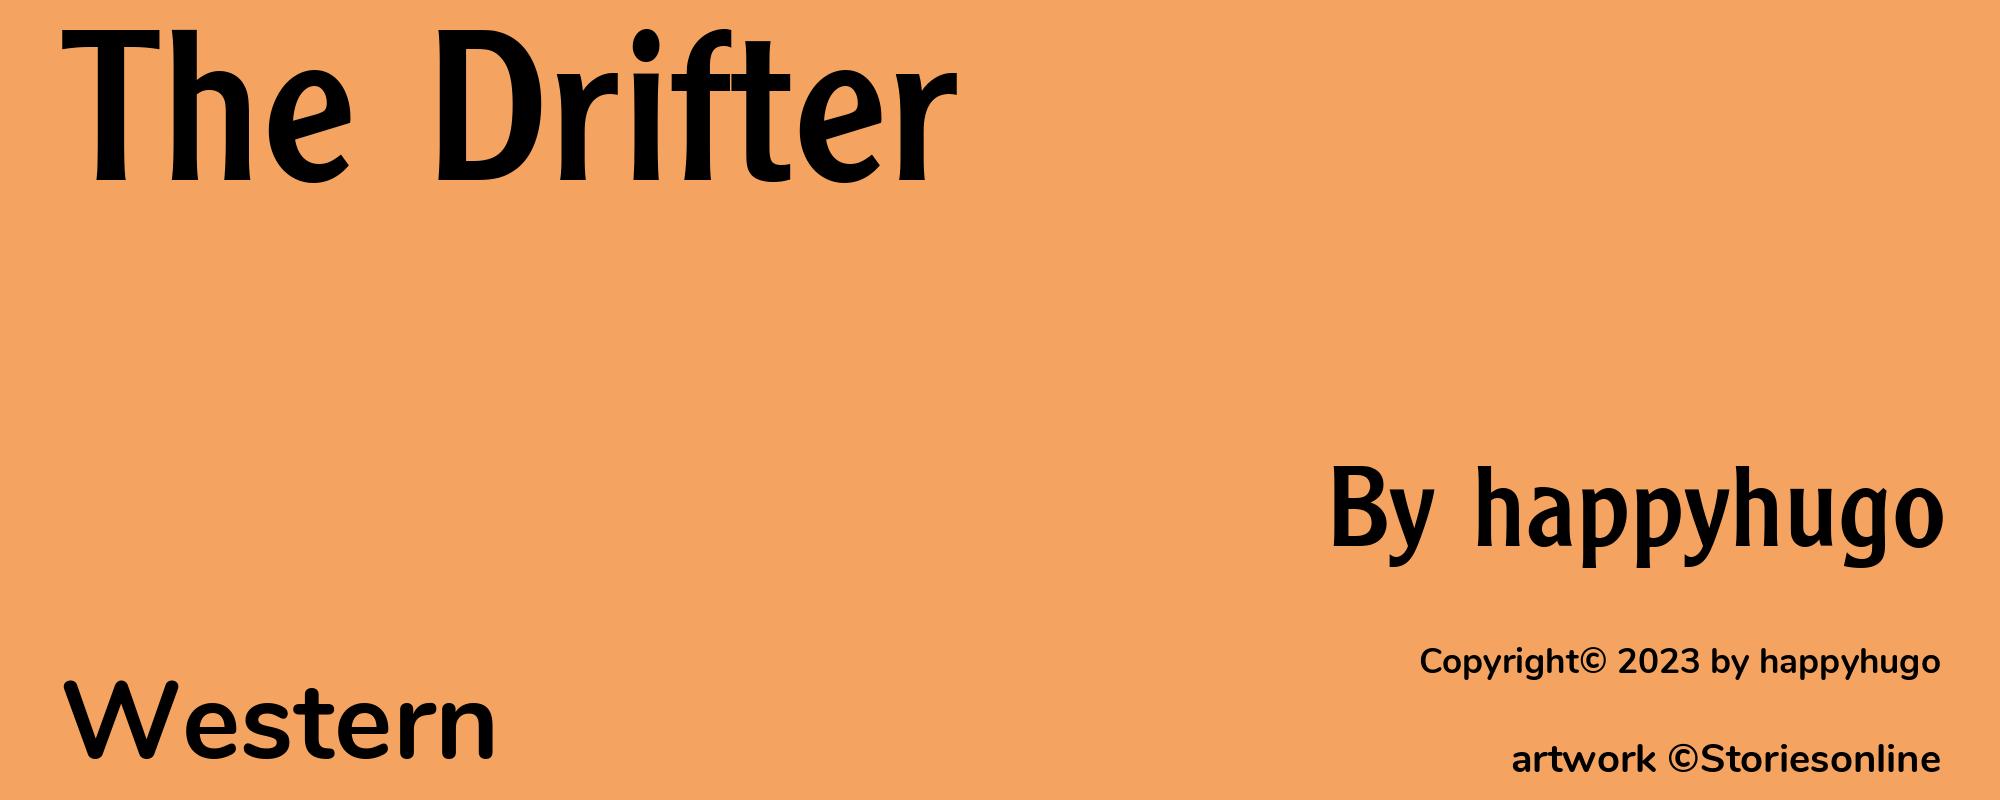 The Drifter - Cover